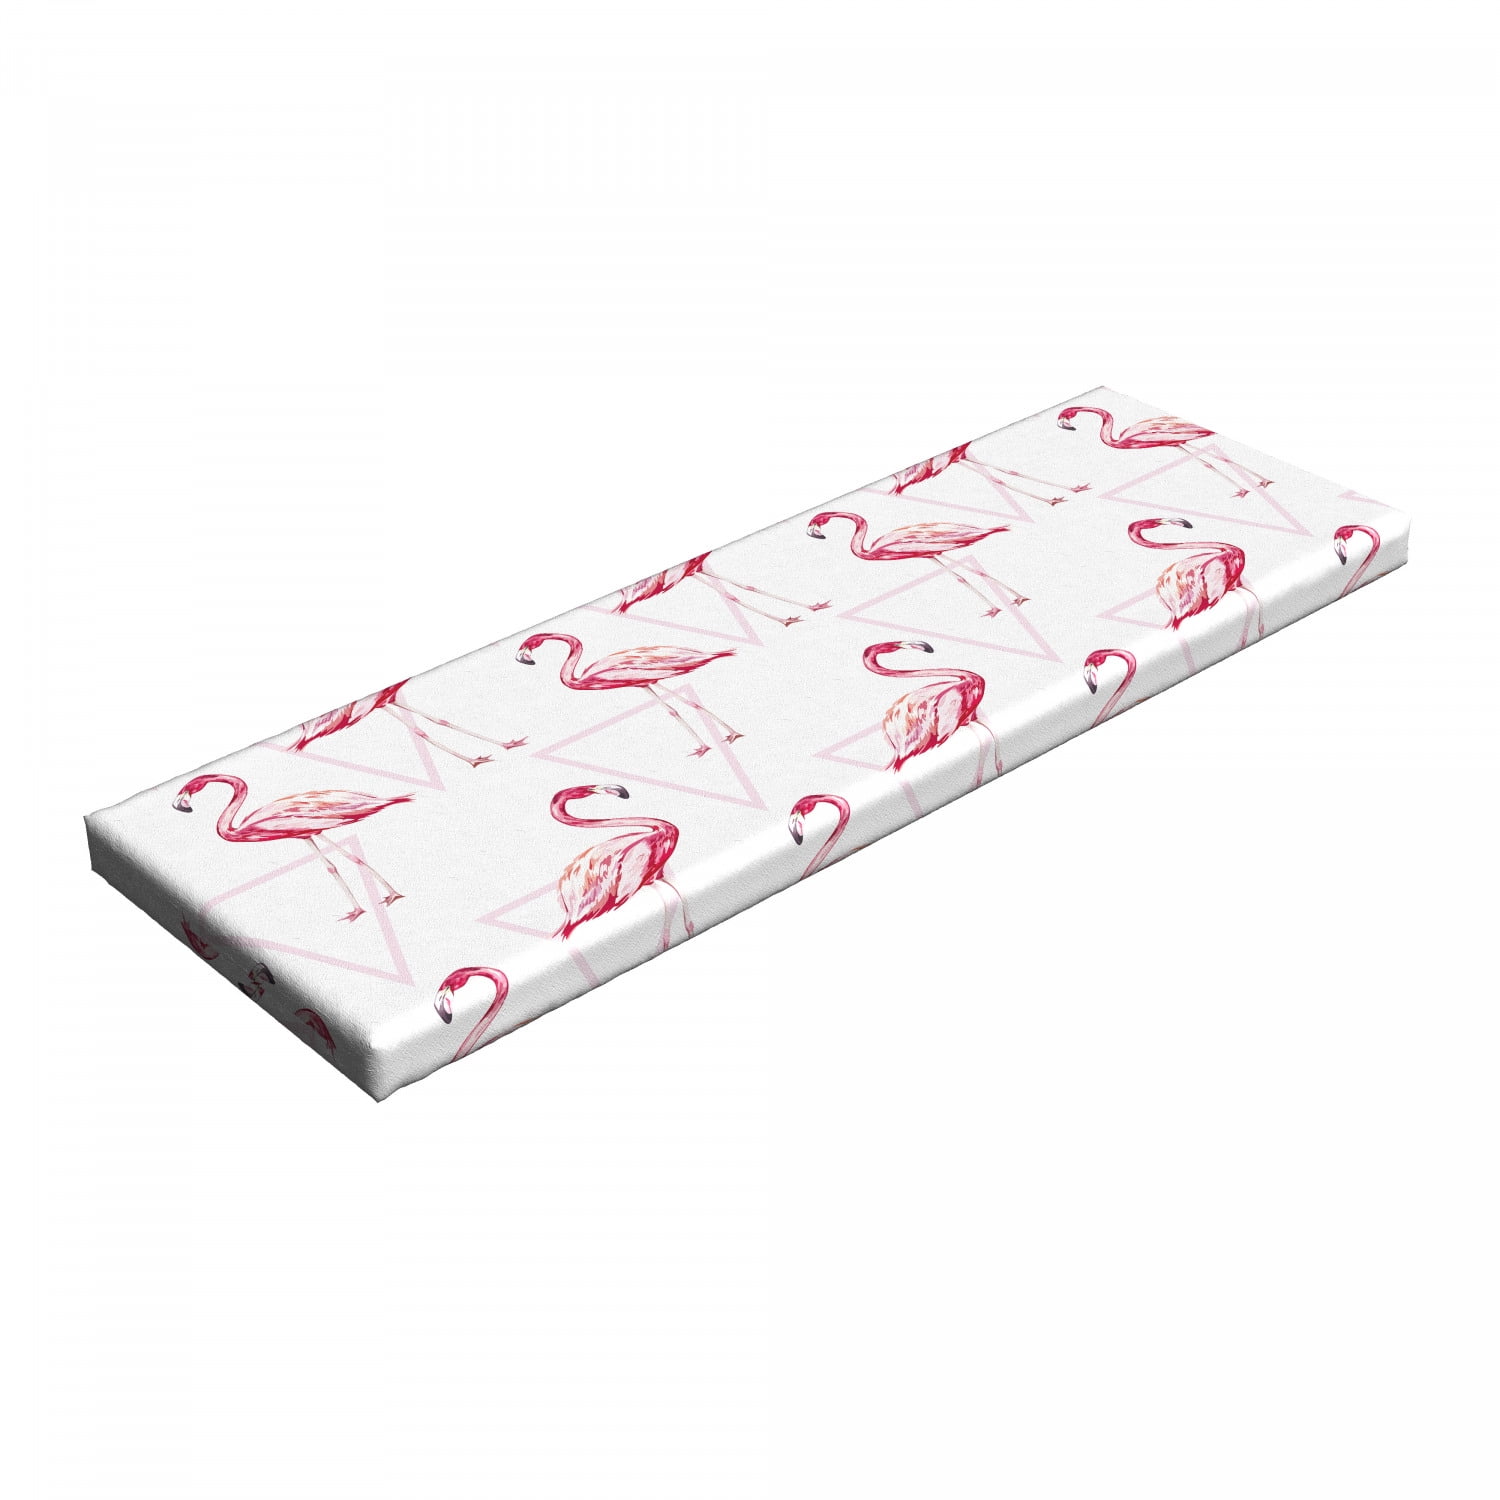 sneeuwman haak Inloggegevens Flamingo Bench Pad, Realistic Drawing Style Animals on Geometrical Backdrop  with Pink Triangles, HR Foam Cushion with Decorative Fabric Cover, 45" x  15" x 2", Pink Peach White, by Ambesonne - Walmart.com